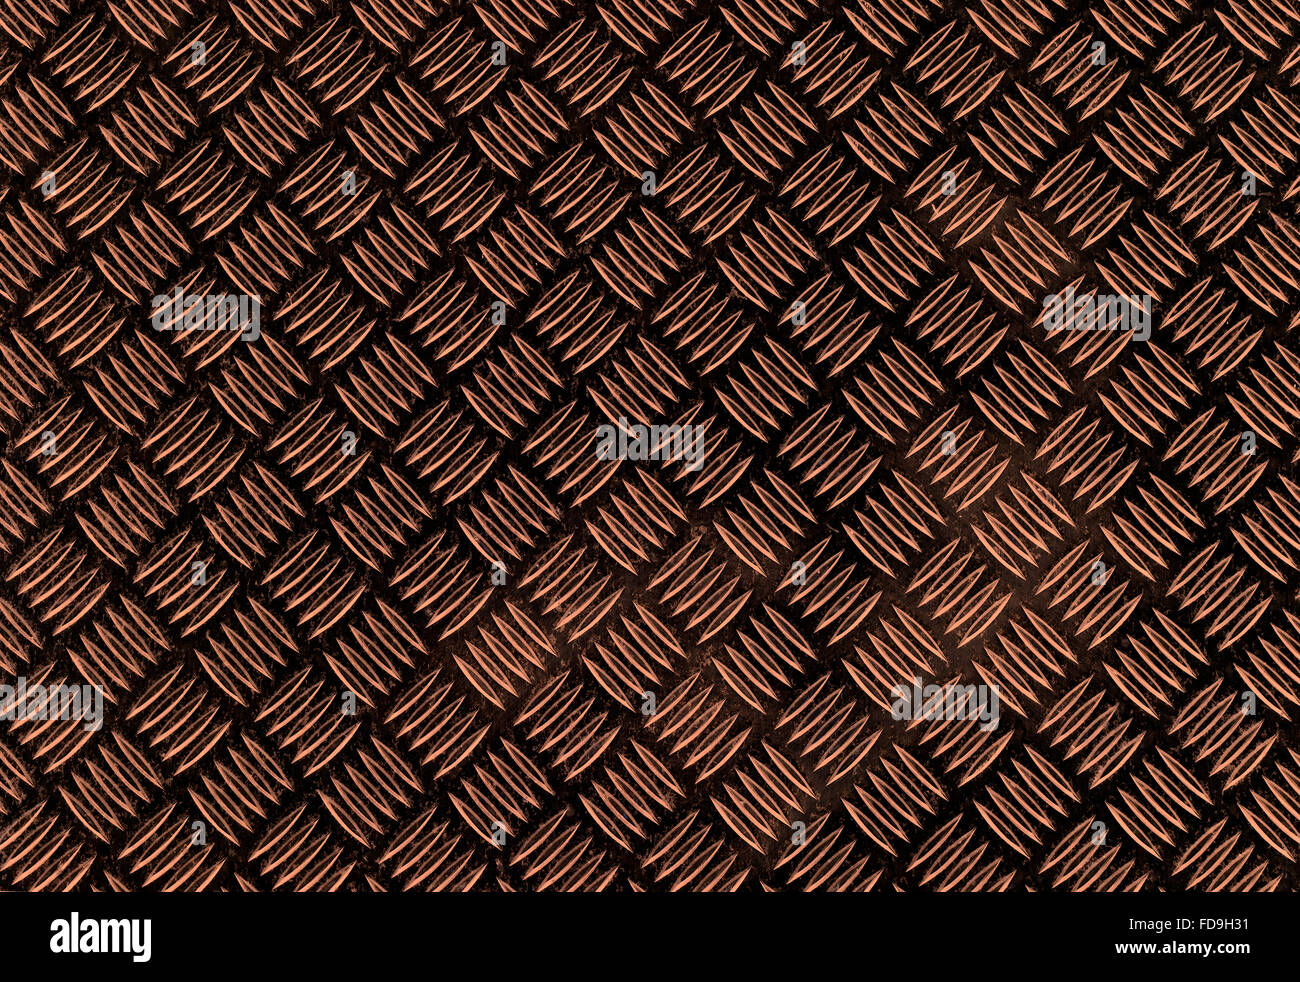 Copper colored diamond plate, also known as checker plate, tread plate, cross hatch kick plate and Durbar floor plate, wide shot Stock Photo